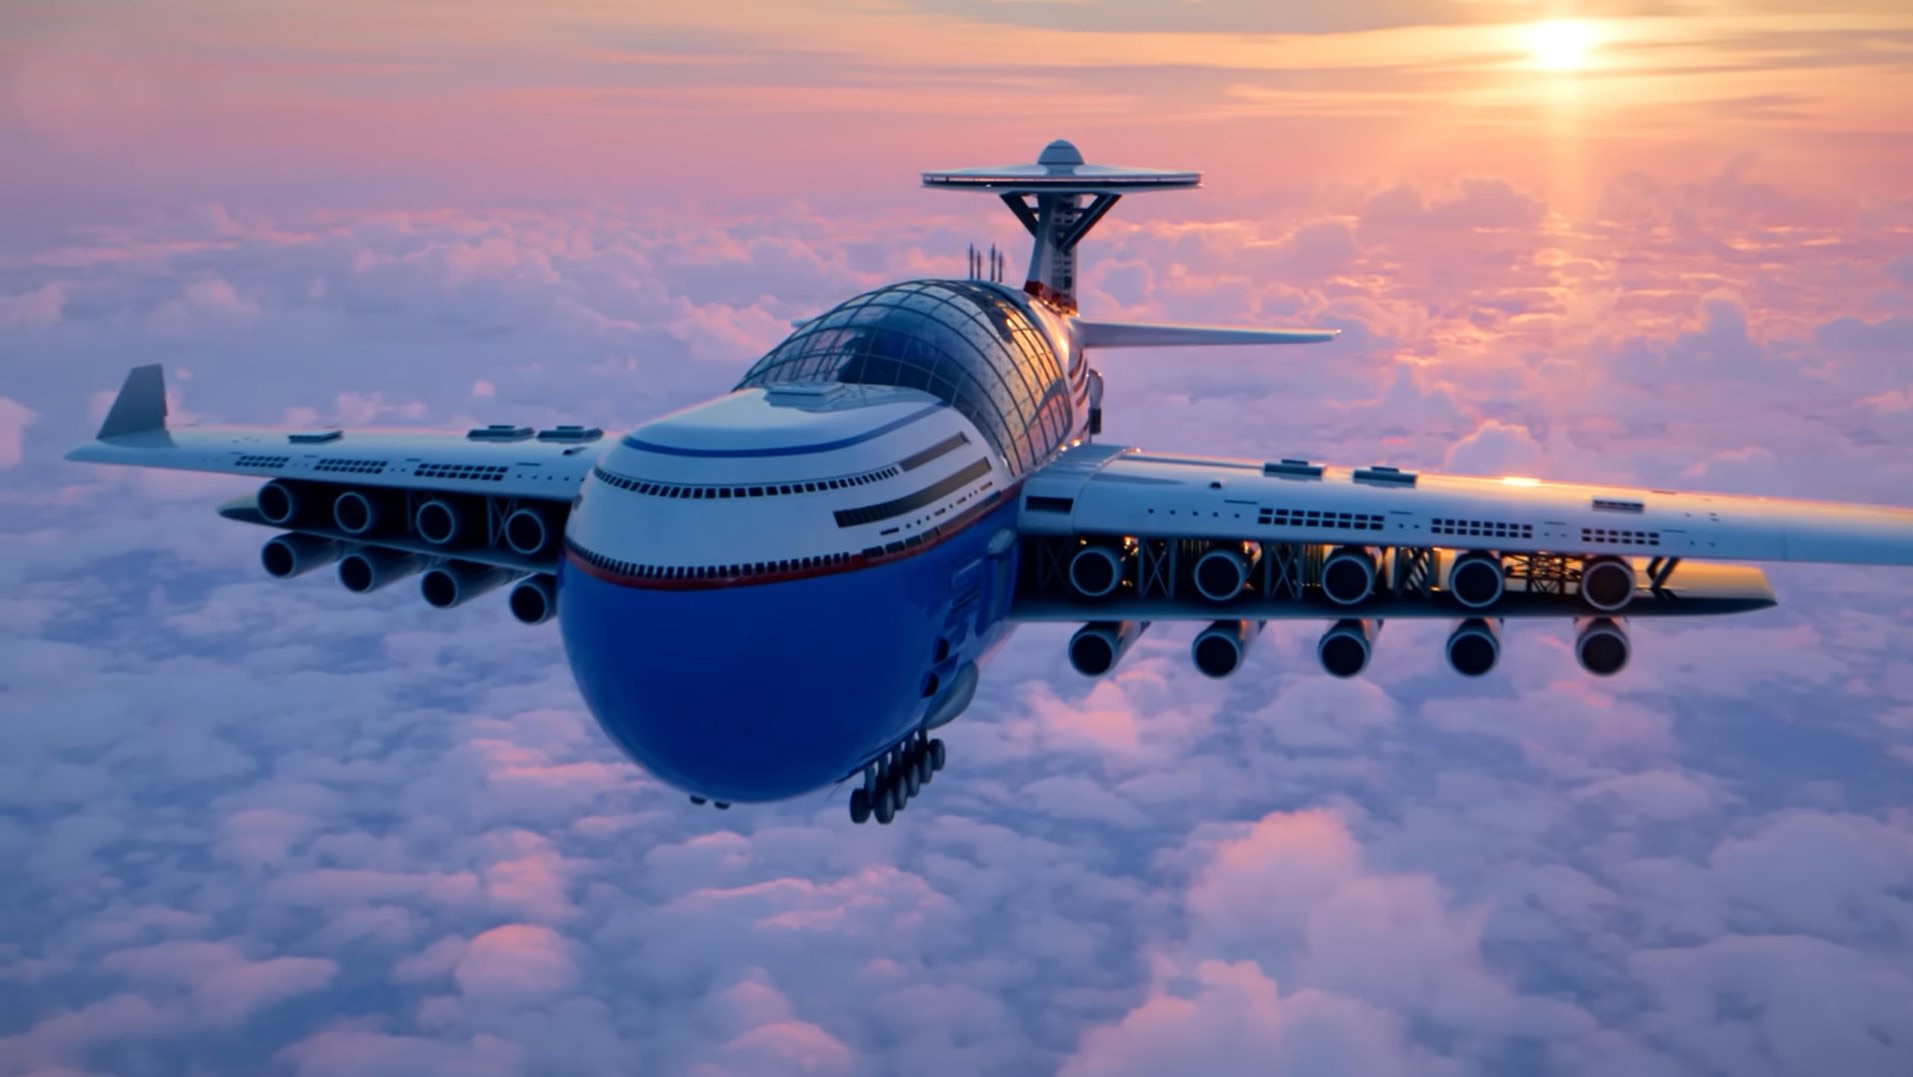 A flying luxury hotel powered by nuclear energy - Domus